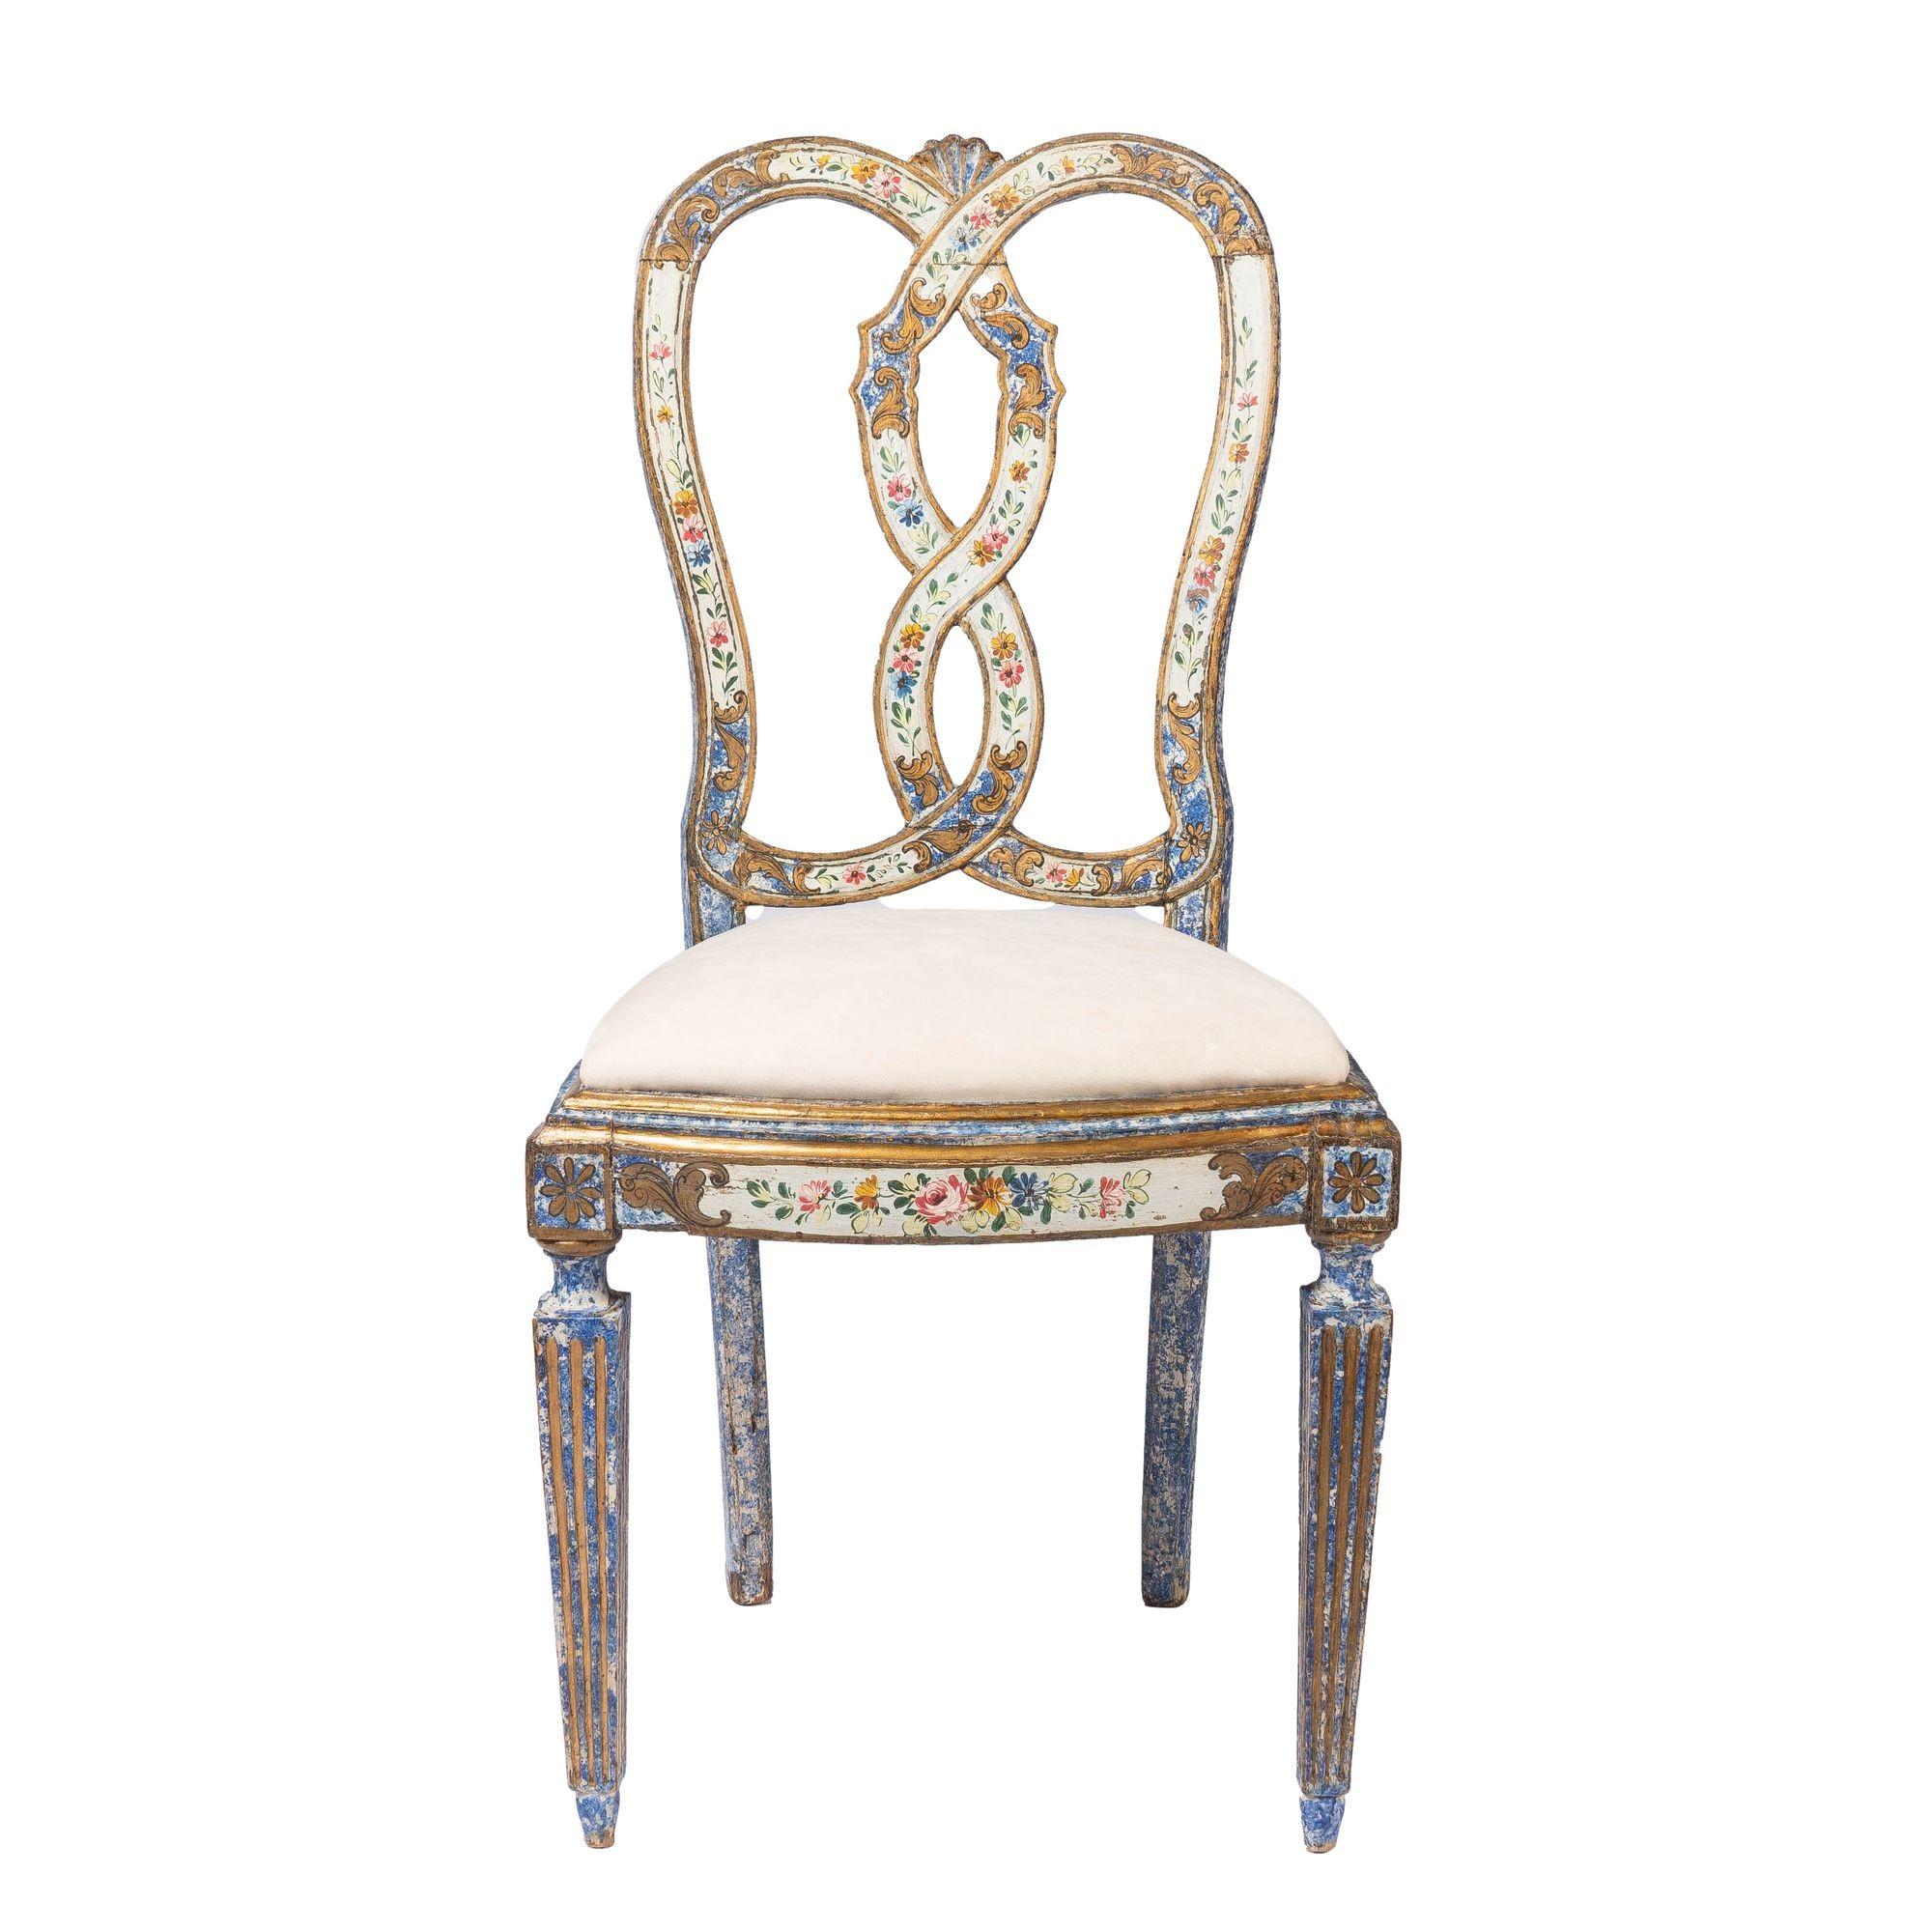 Italian Baroque “Queen Anne” side chair in original painted decoration with a bone colored ultrasuede upholstered slip seat. The painted surfaces have been cleaned and stabilized. Areas of later repair or in-painting have been removed, revealing its